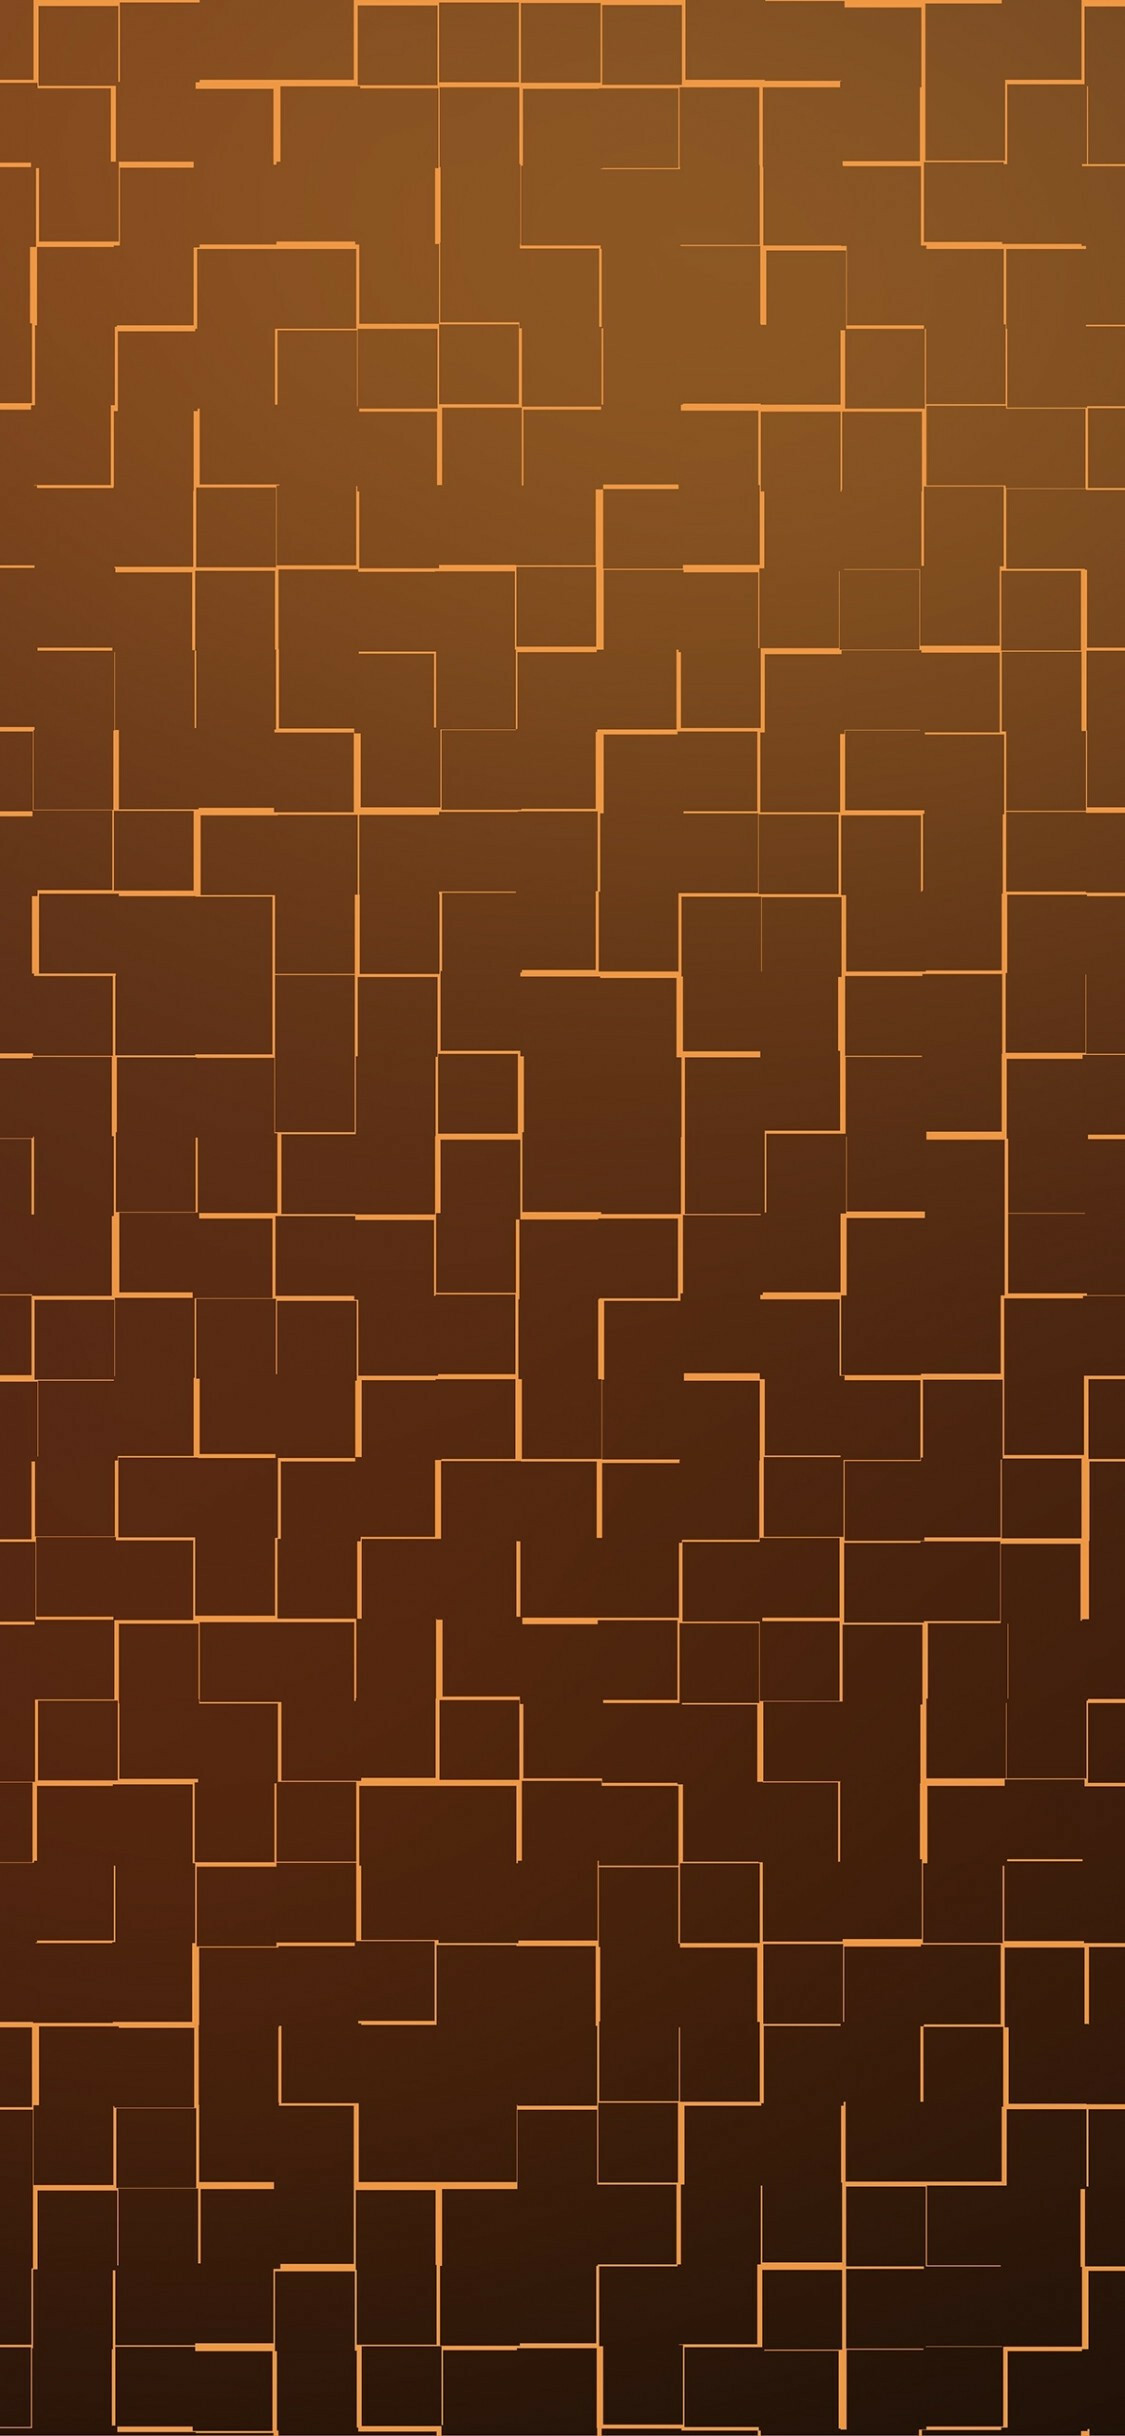 Labyrinth: A branching tour puzzle through which the solver must find a route. 1130x2440 HD Wallpaper.